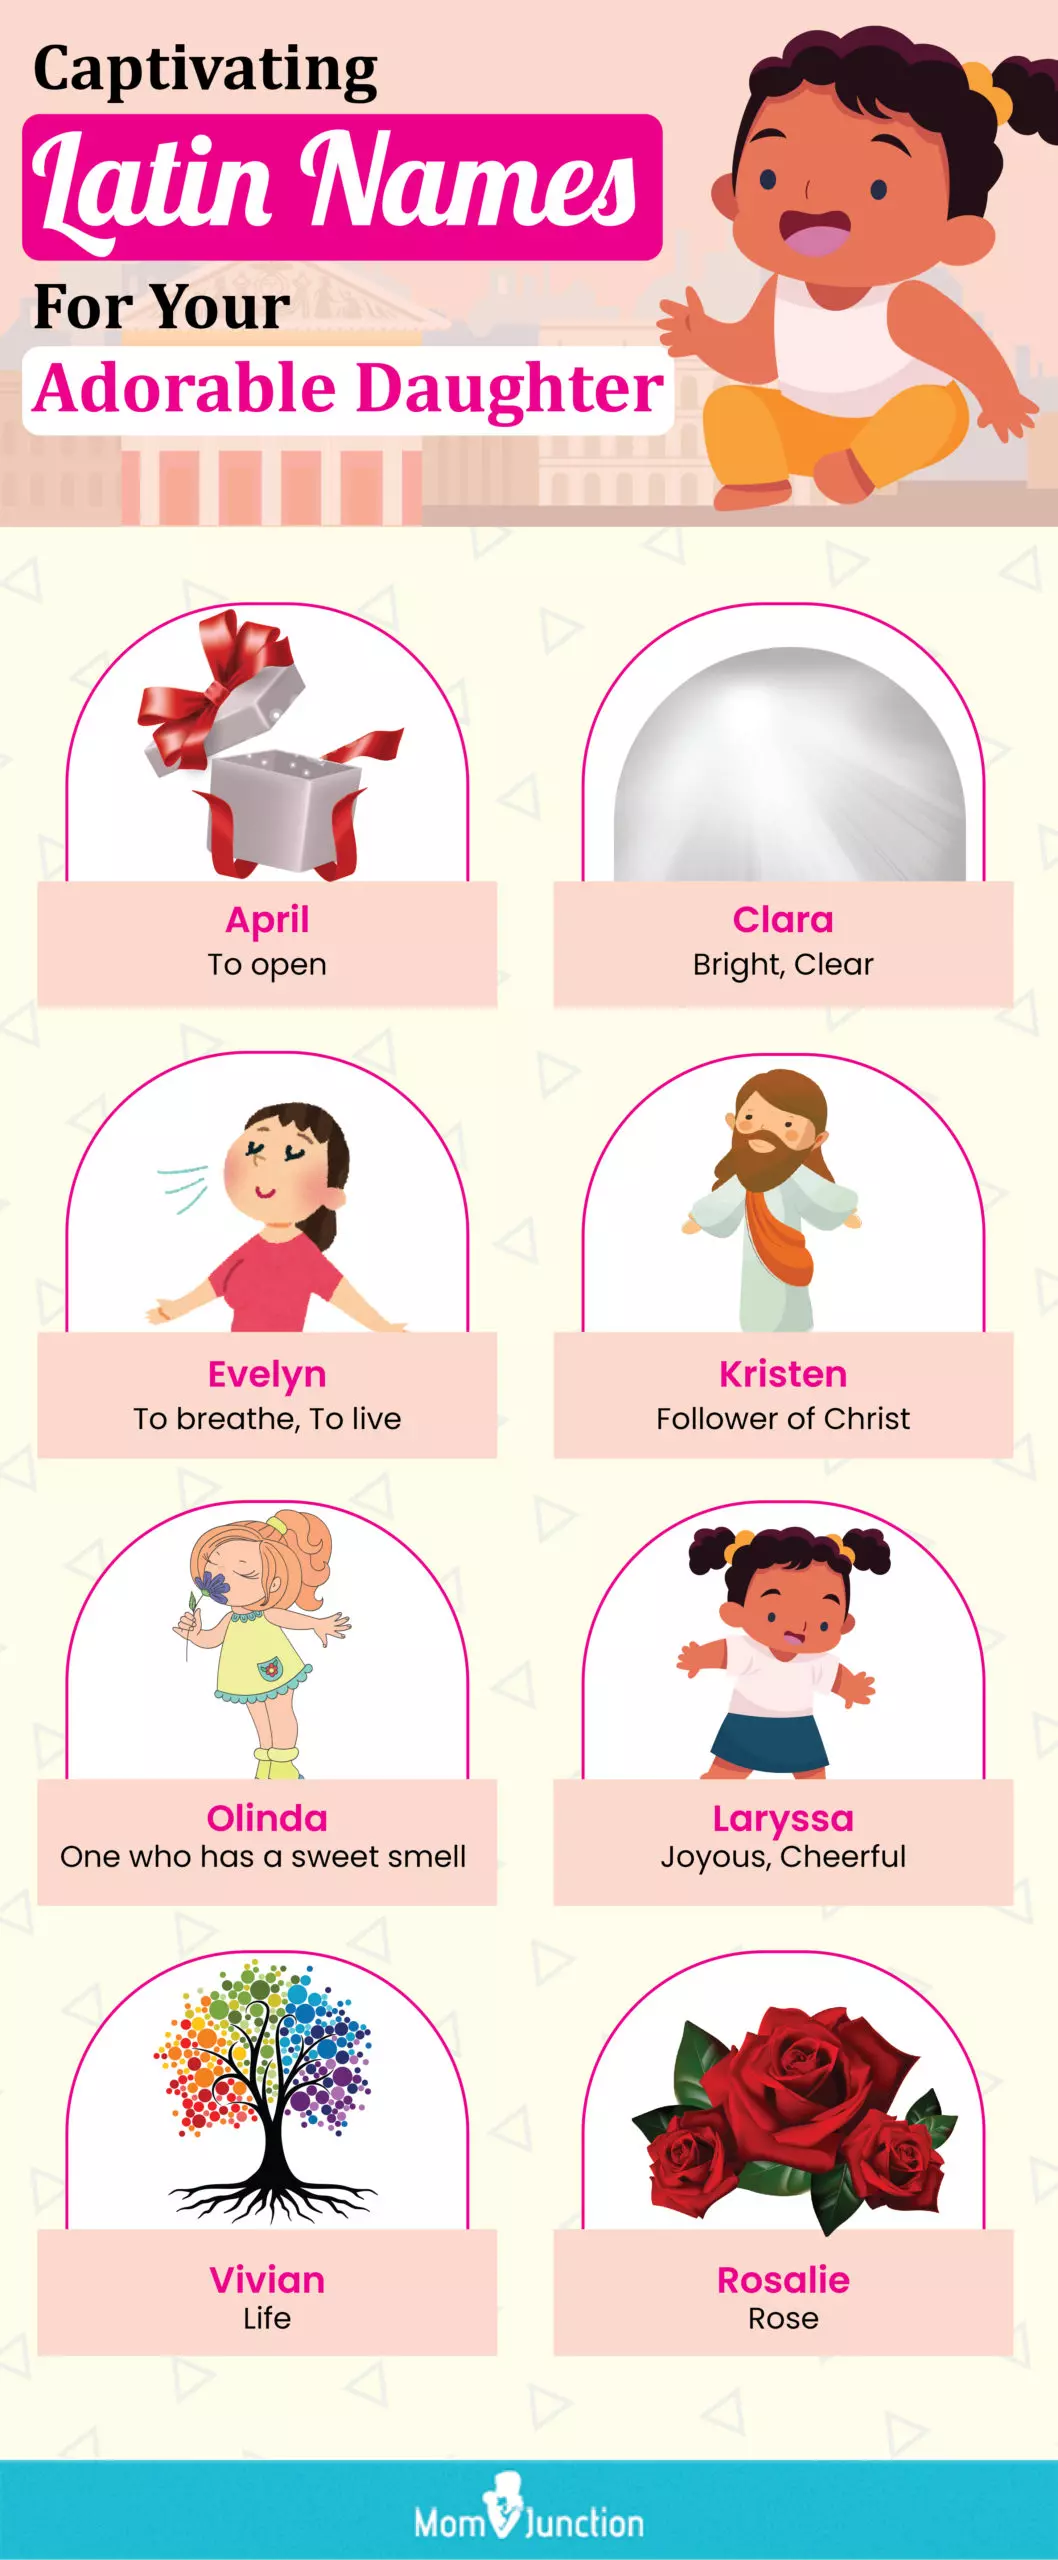 latin names for you adorable daughter (infographic)